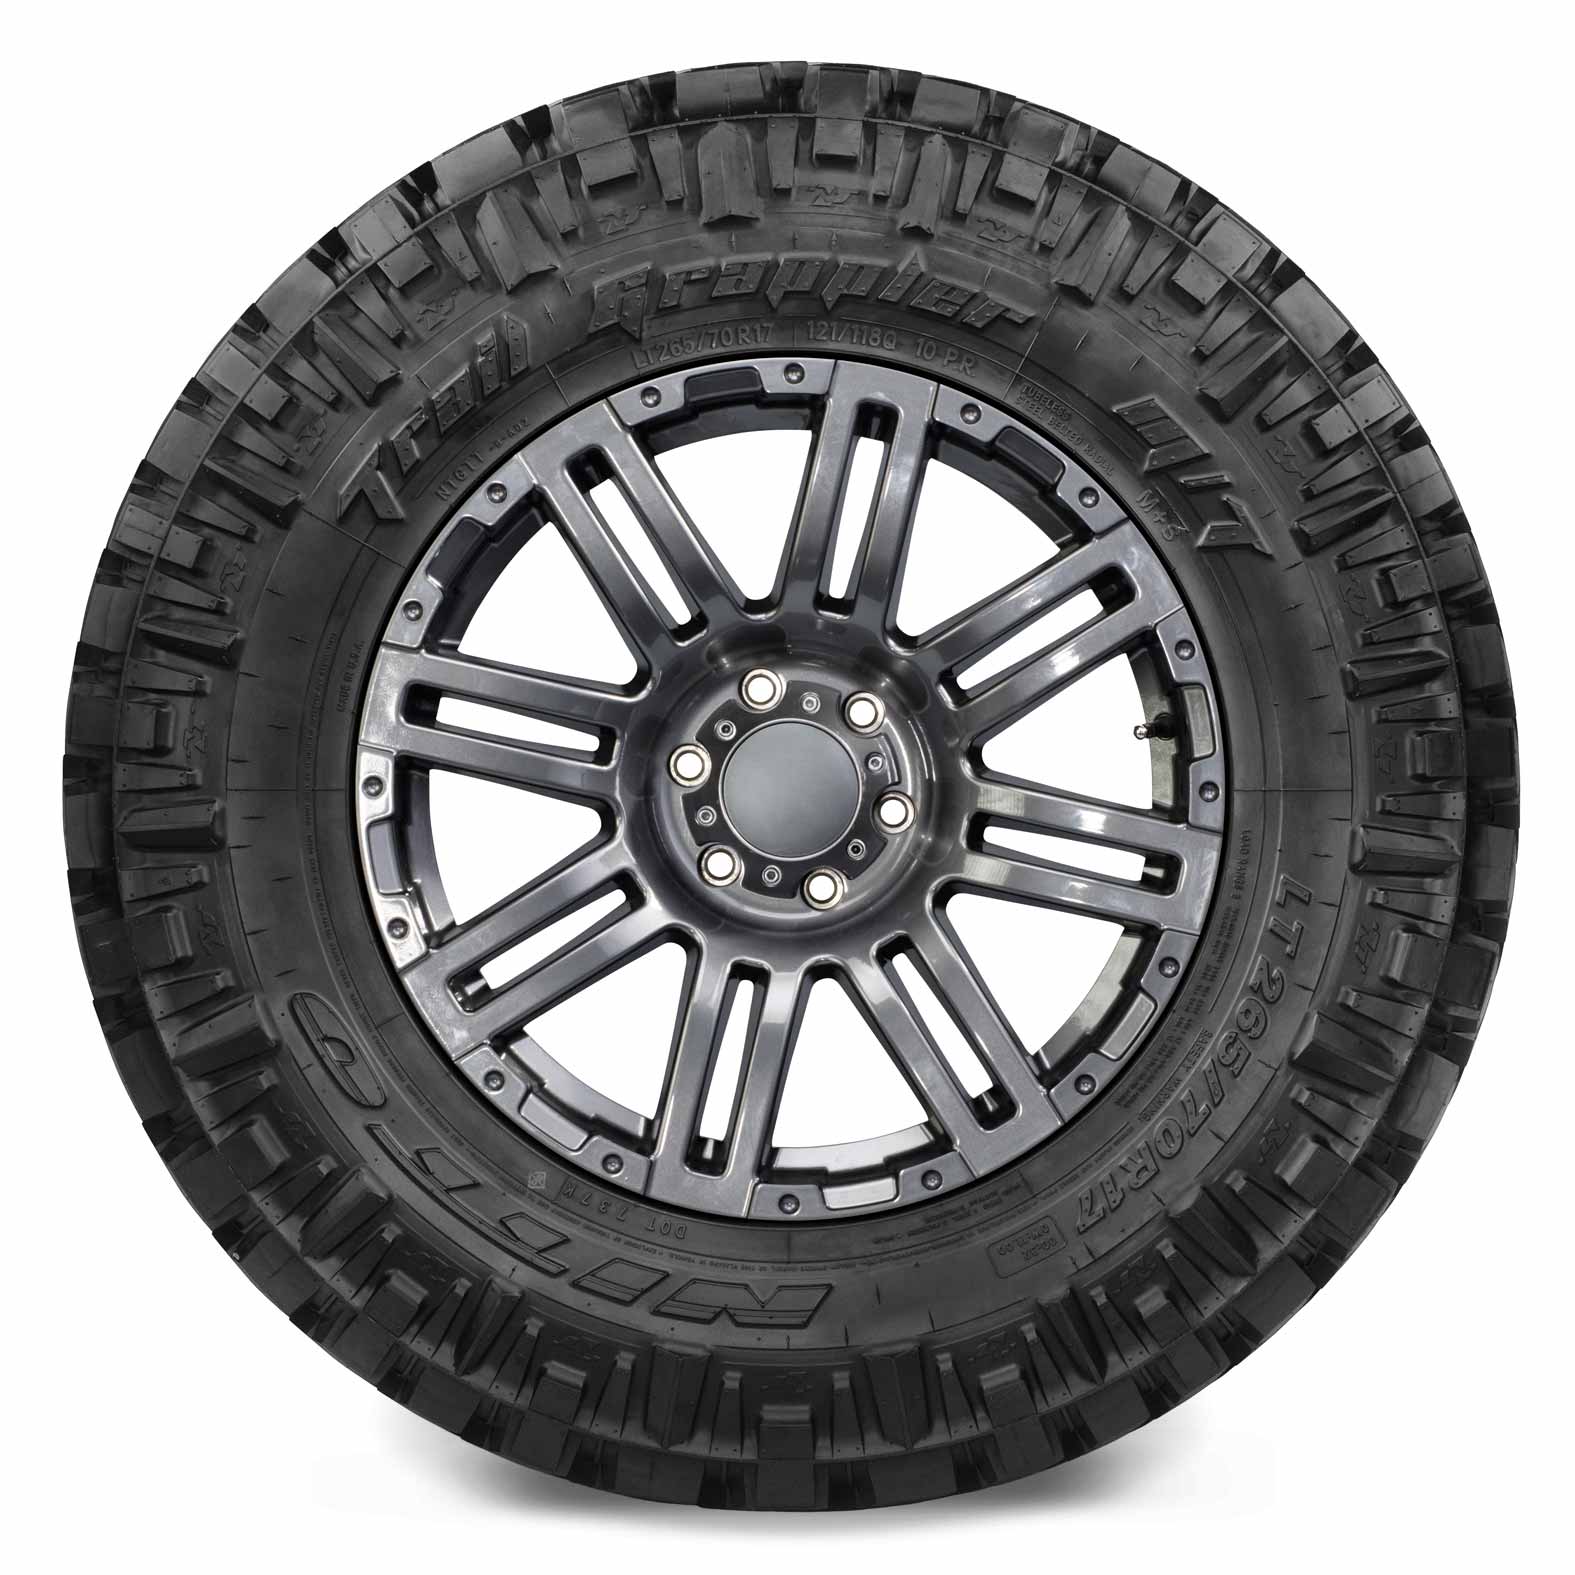 Nitto Trail Grappler Mt Tires